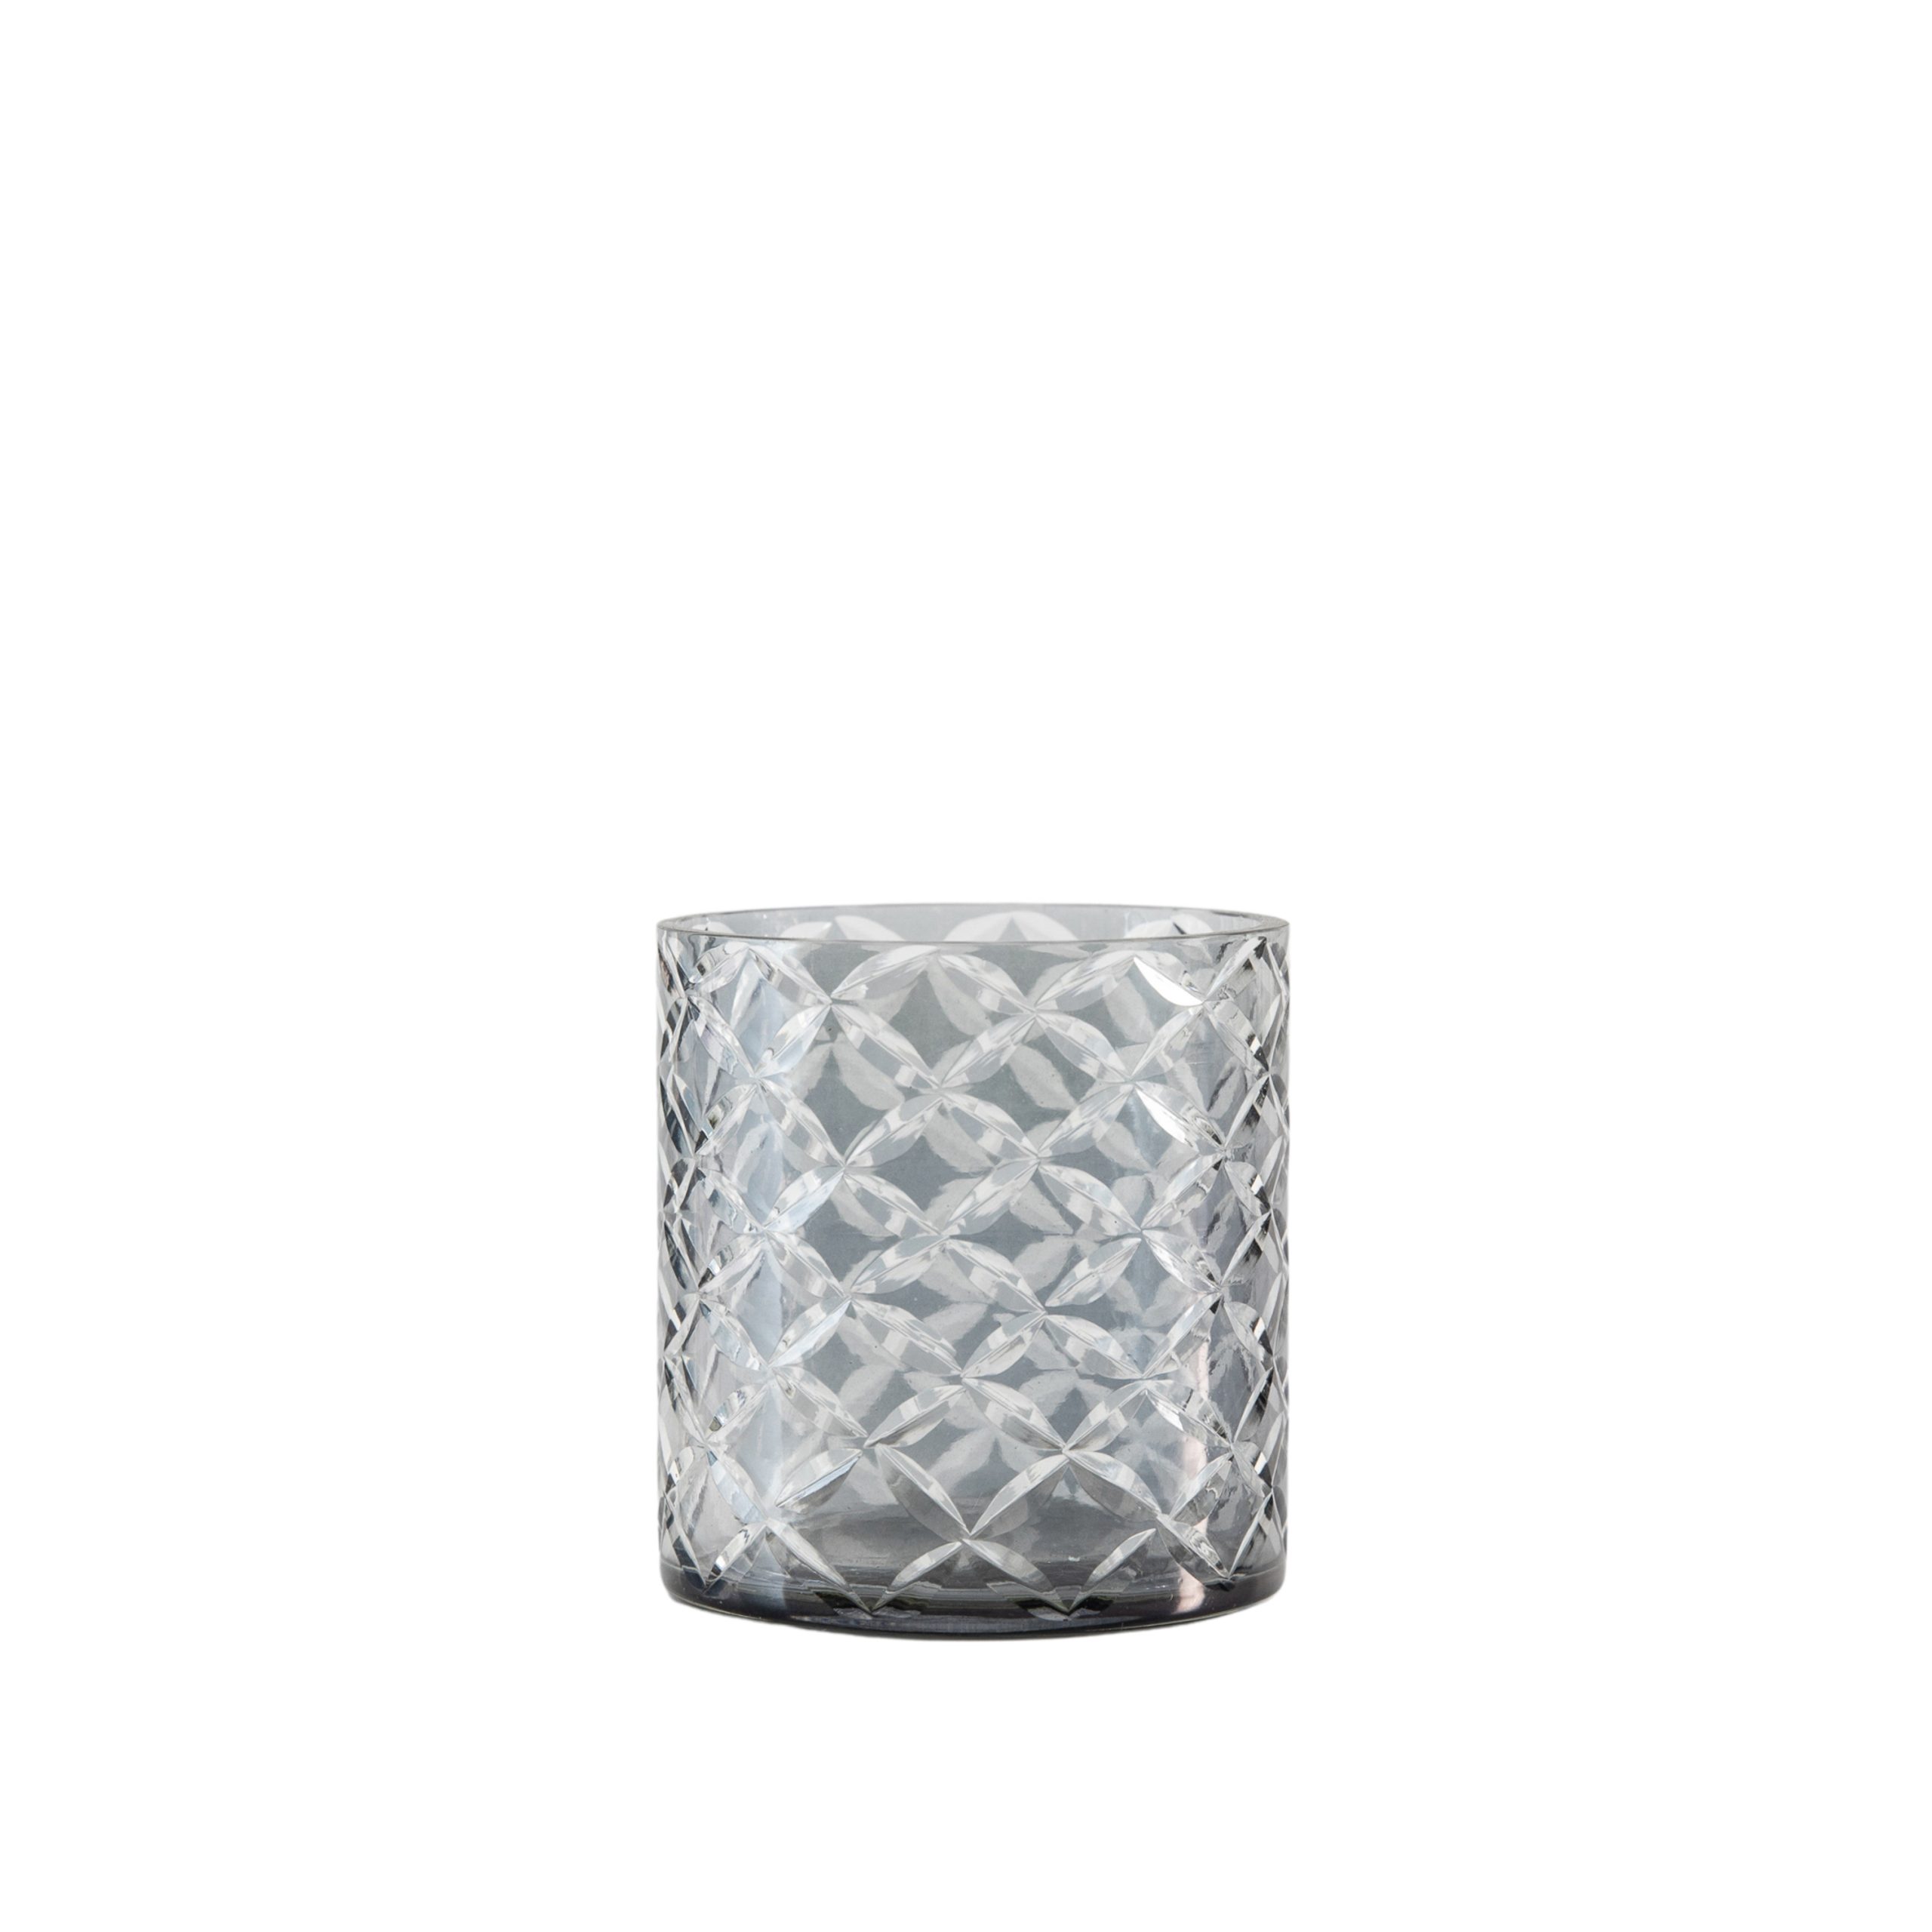 Gallery Direct Lorna Tealight Holder Grey (Pack of 2)